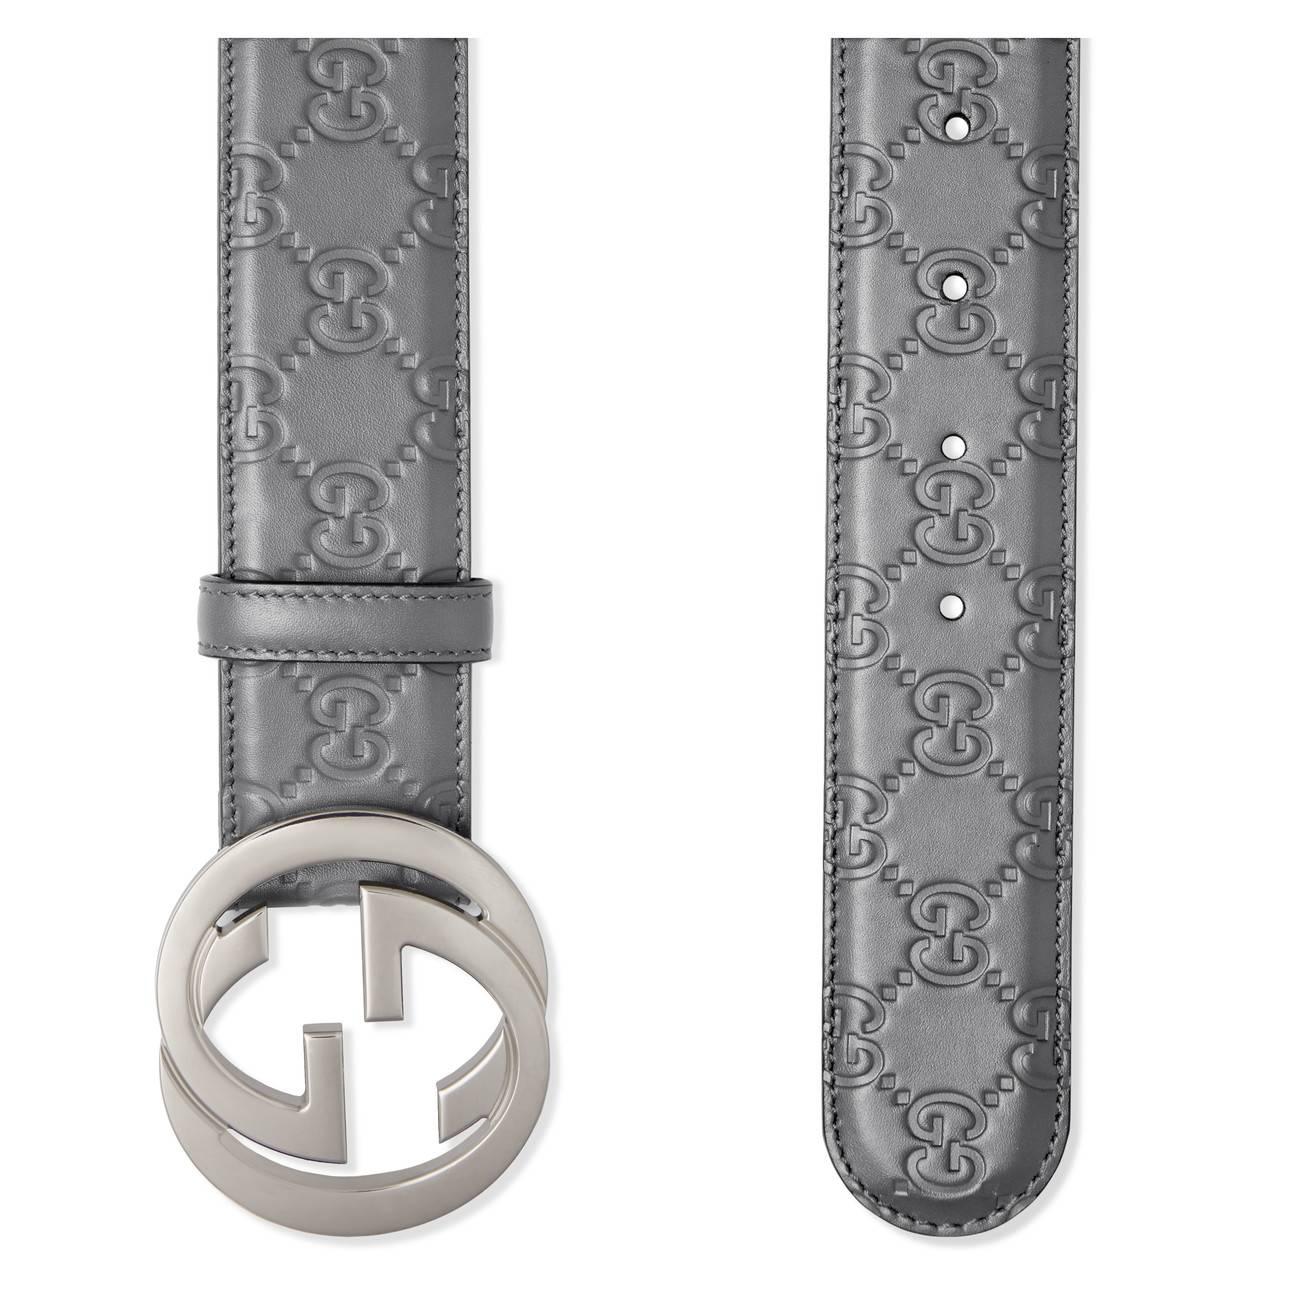 Gucci Leather Signature Belt With G Buckle in Grey (Gray) for Men - Lyst